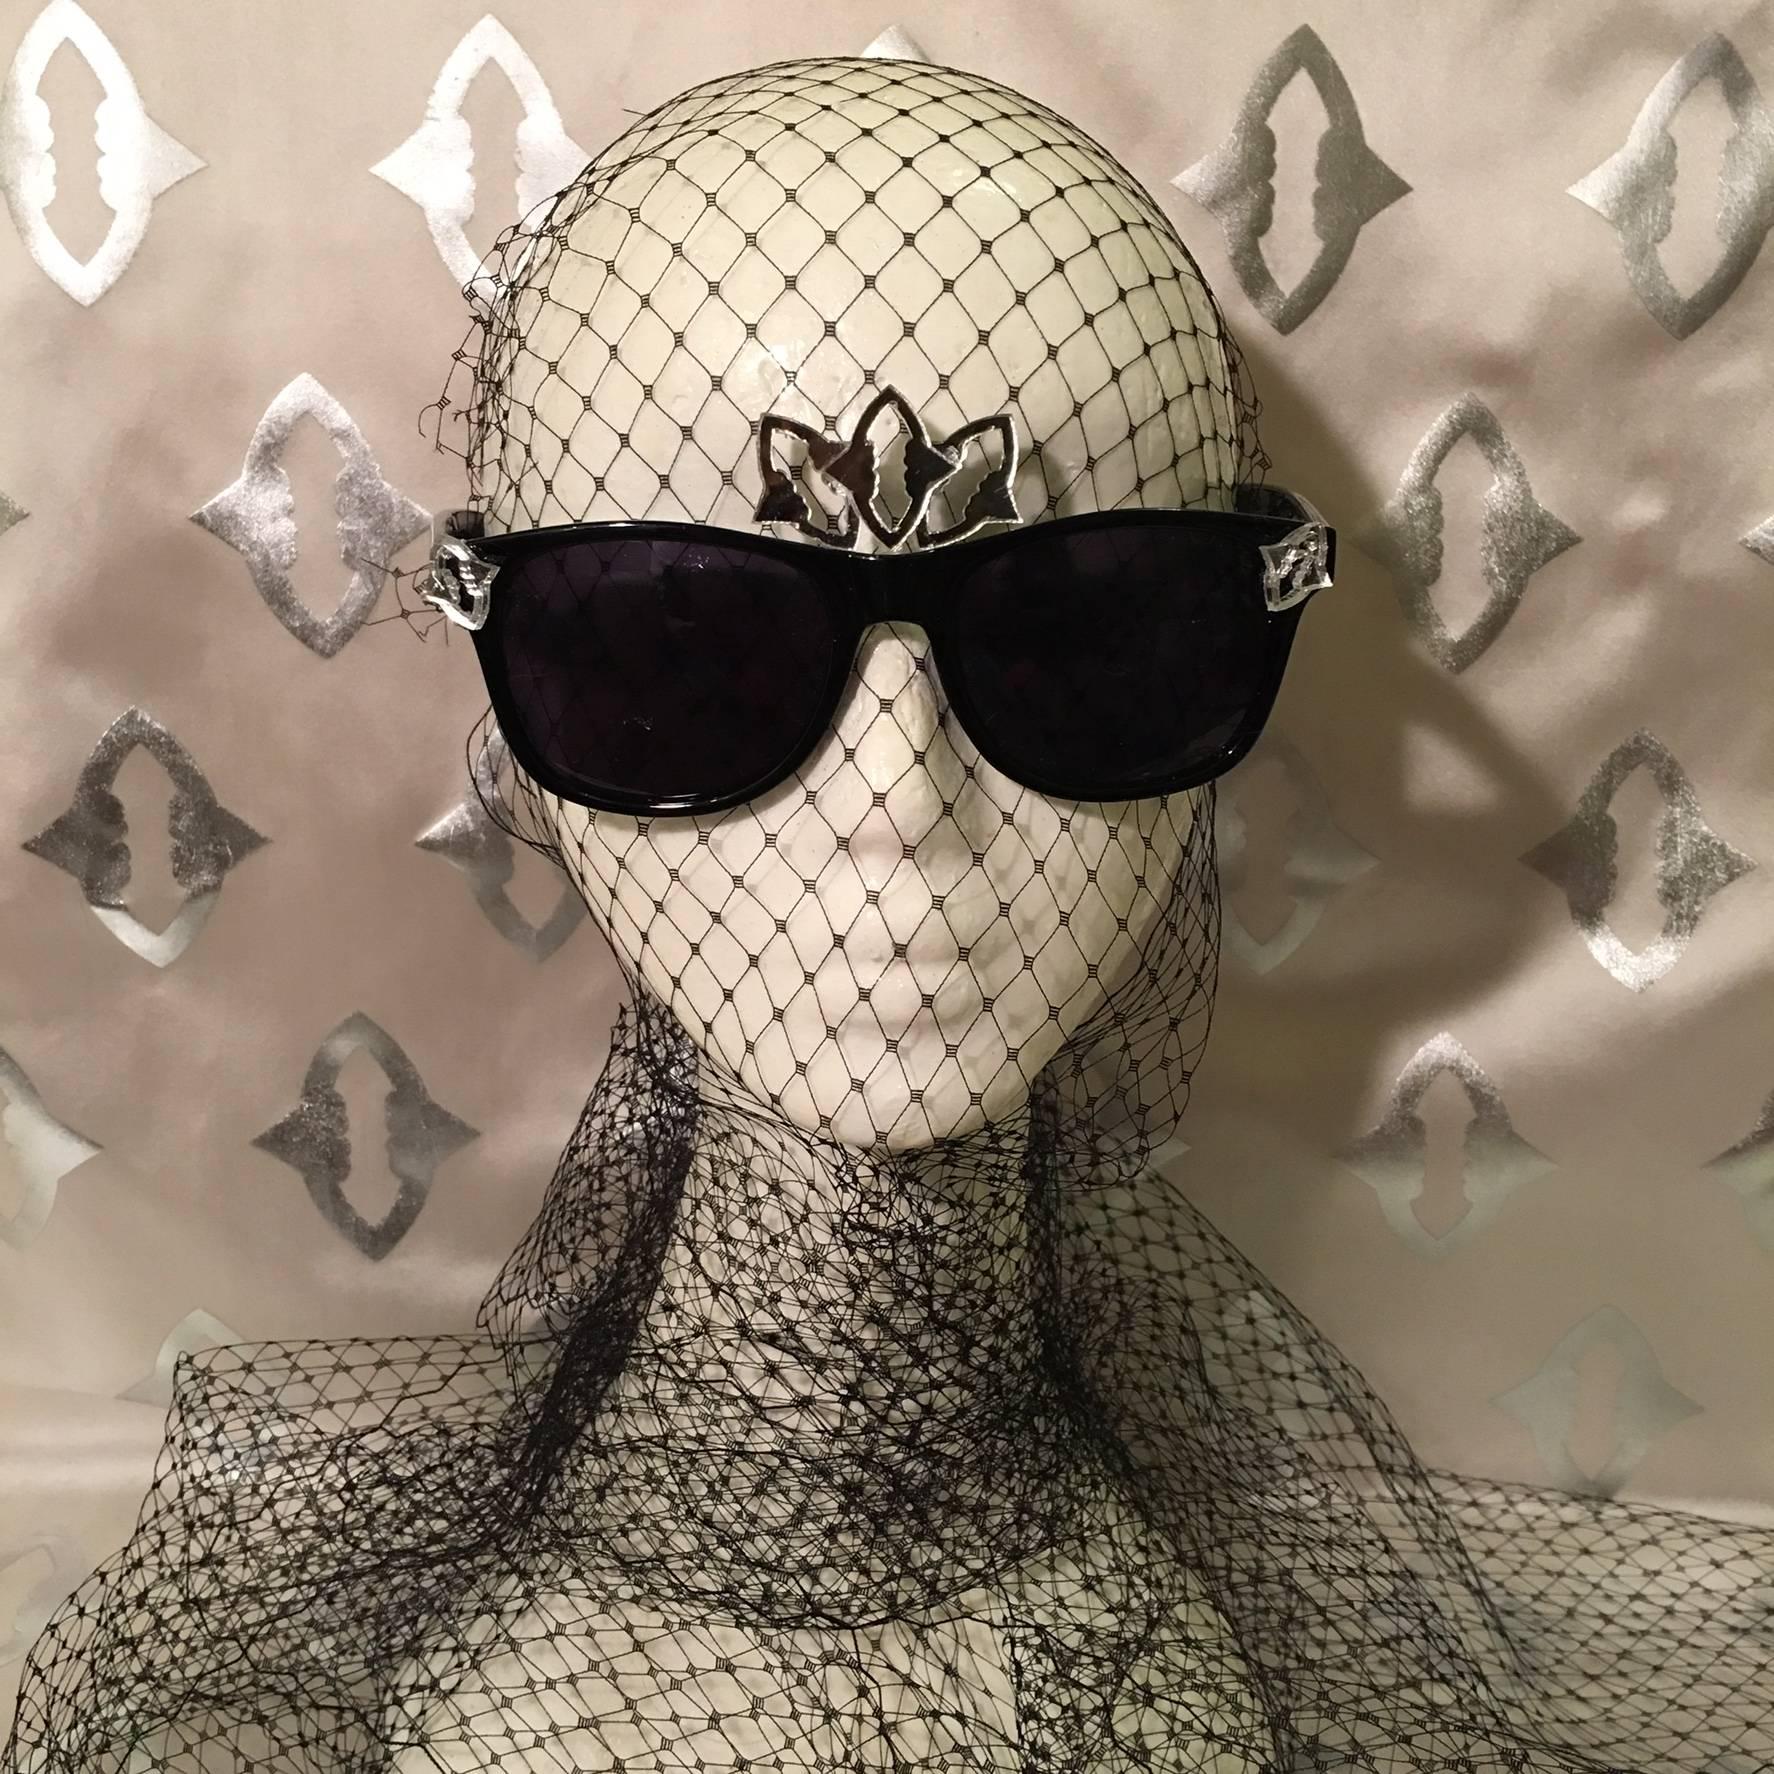 STACY ENGMAN ART ROYALTY - Signature Diamond Dust Sunglasses-Tiara Featuring 3 Carat Actual Diamond Dust and Referencing The Iconic Warhol Diamond Dust Painting Series

Each precious pair is hand made in New York by custom craftsmen in the atelier